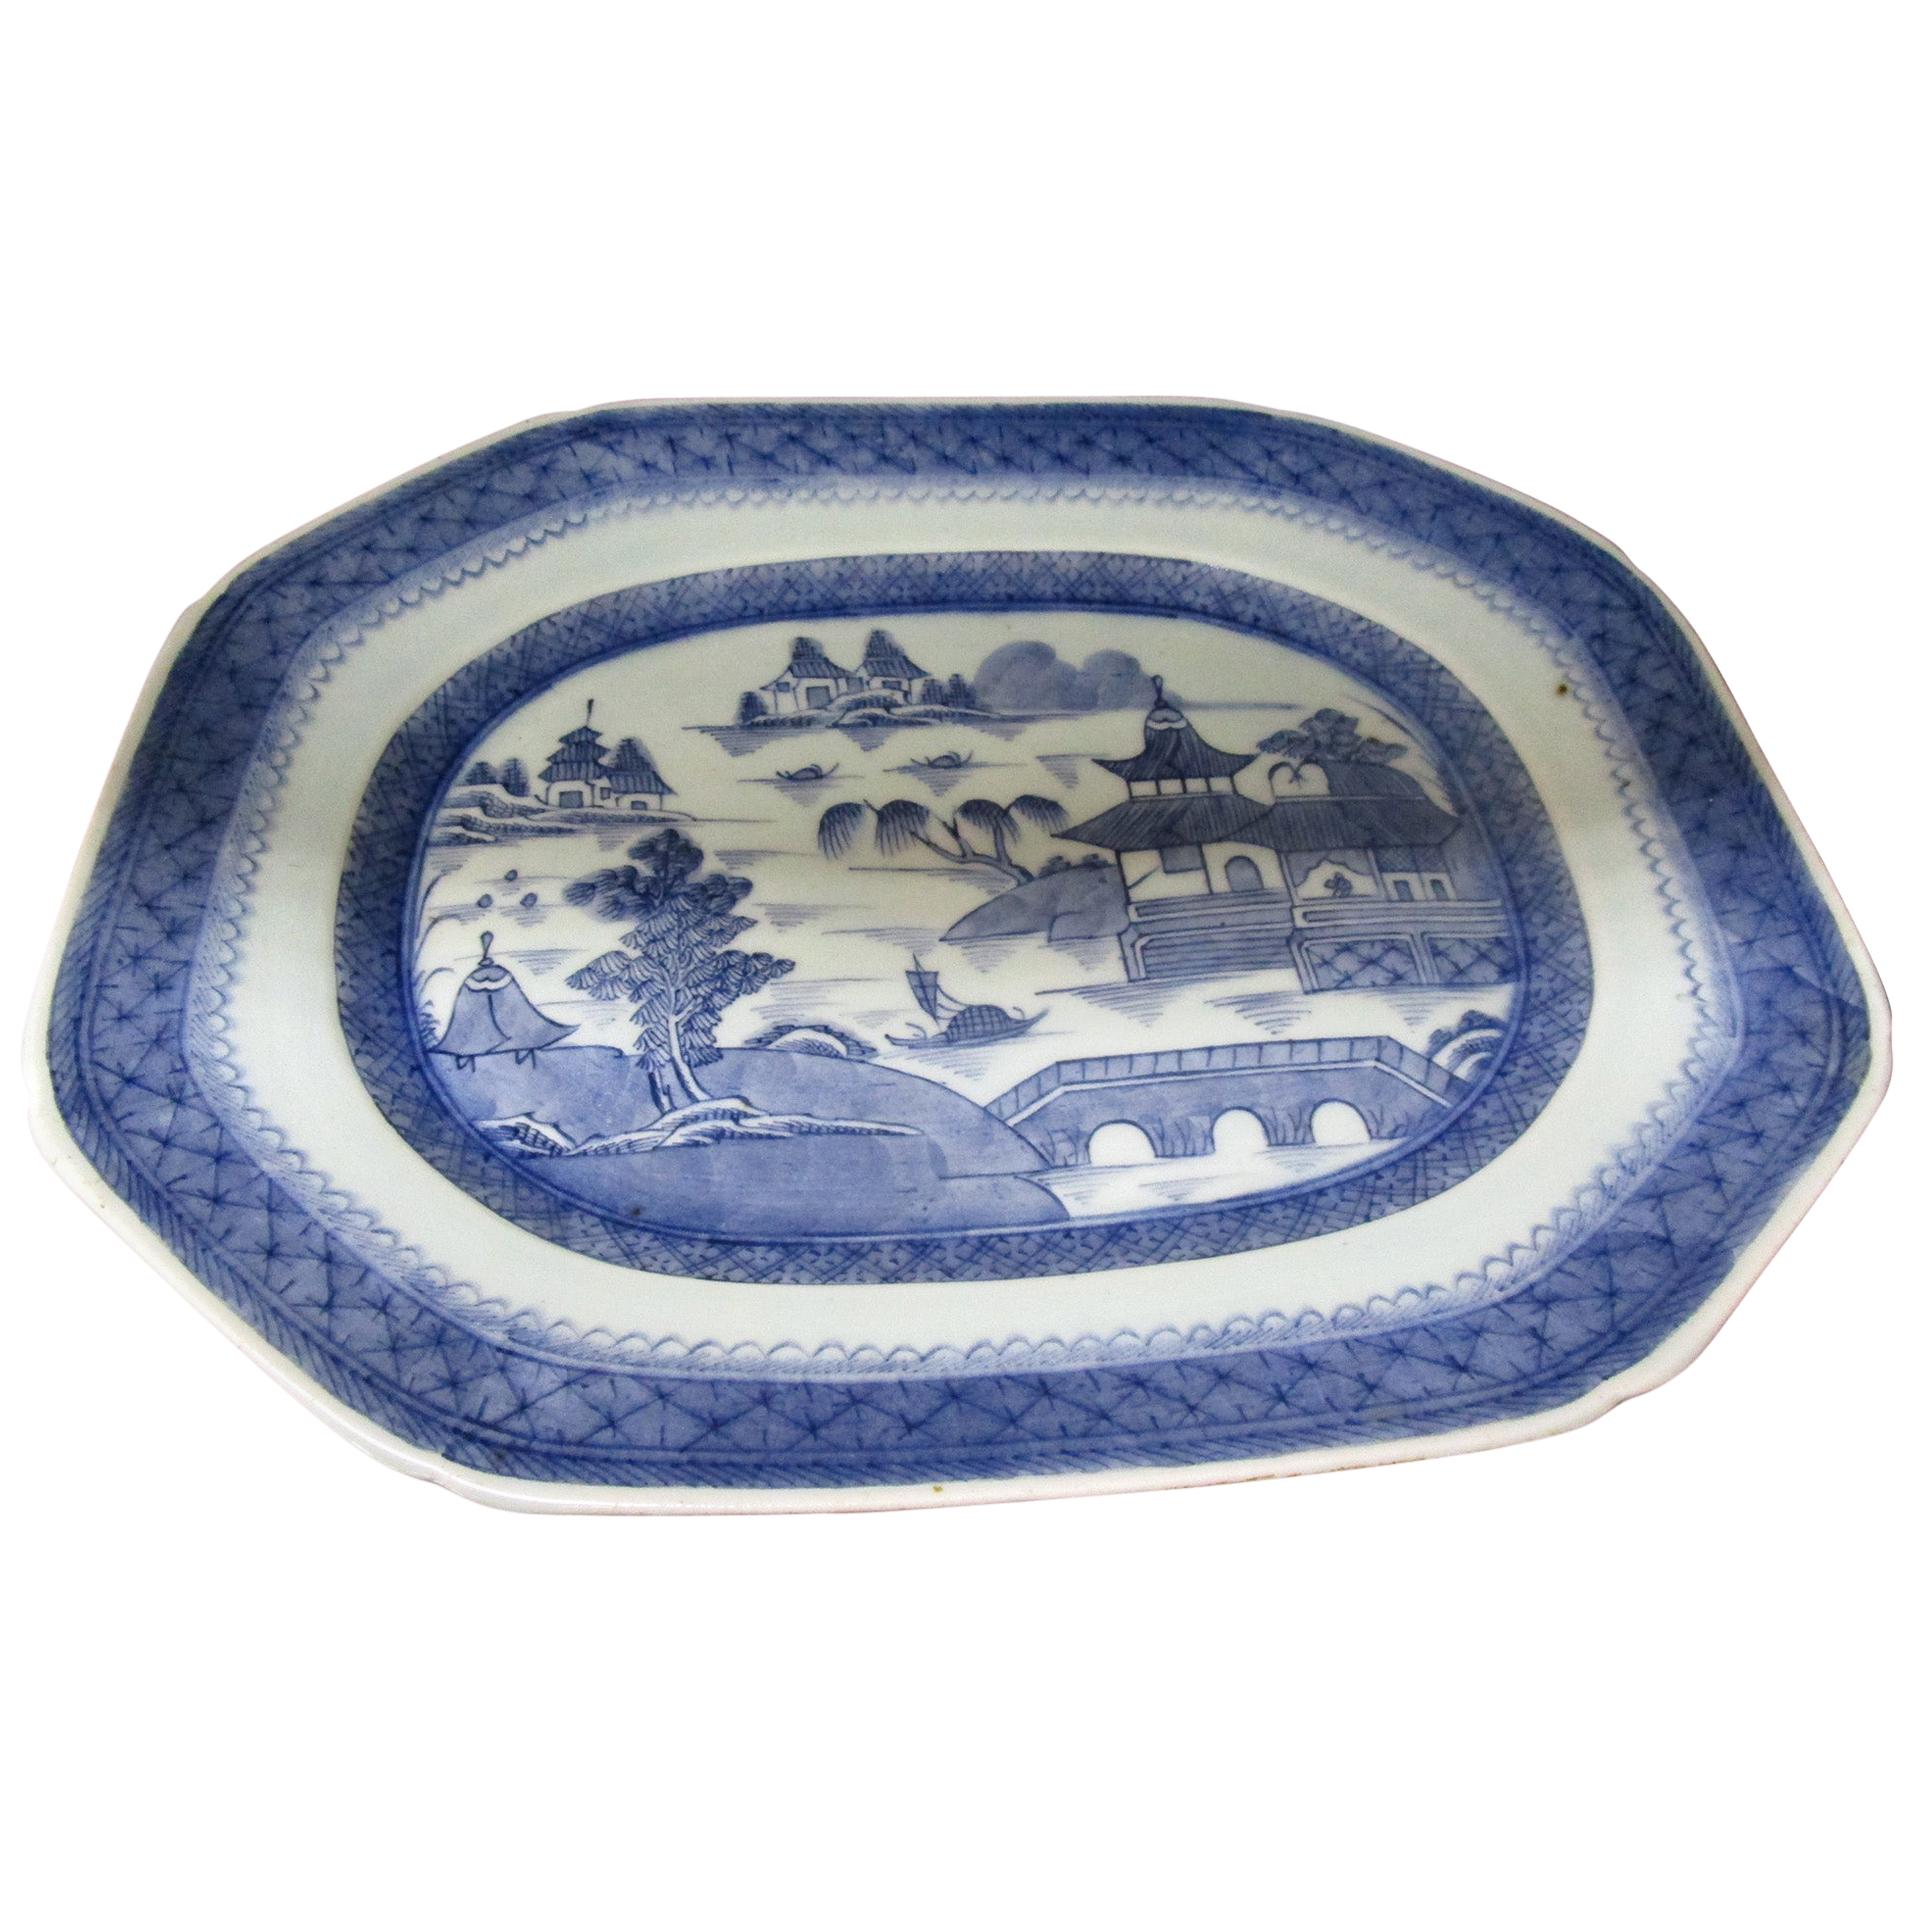 19th Century Chinese Export Blue and White Canton Ware Platter